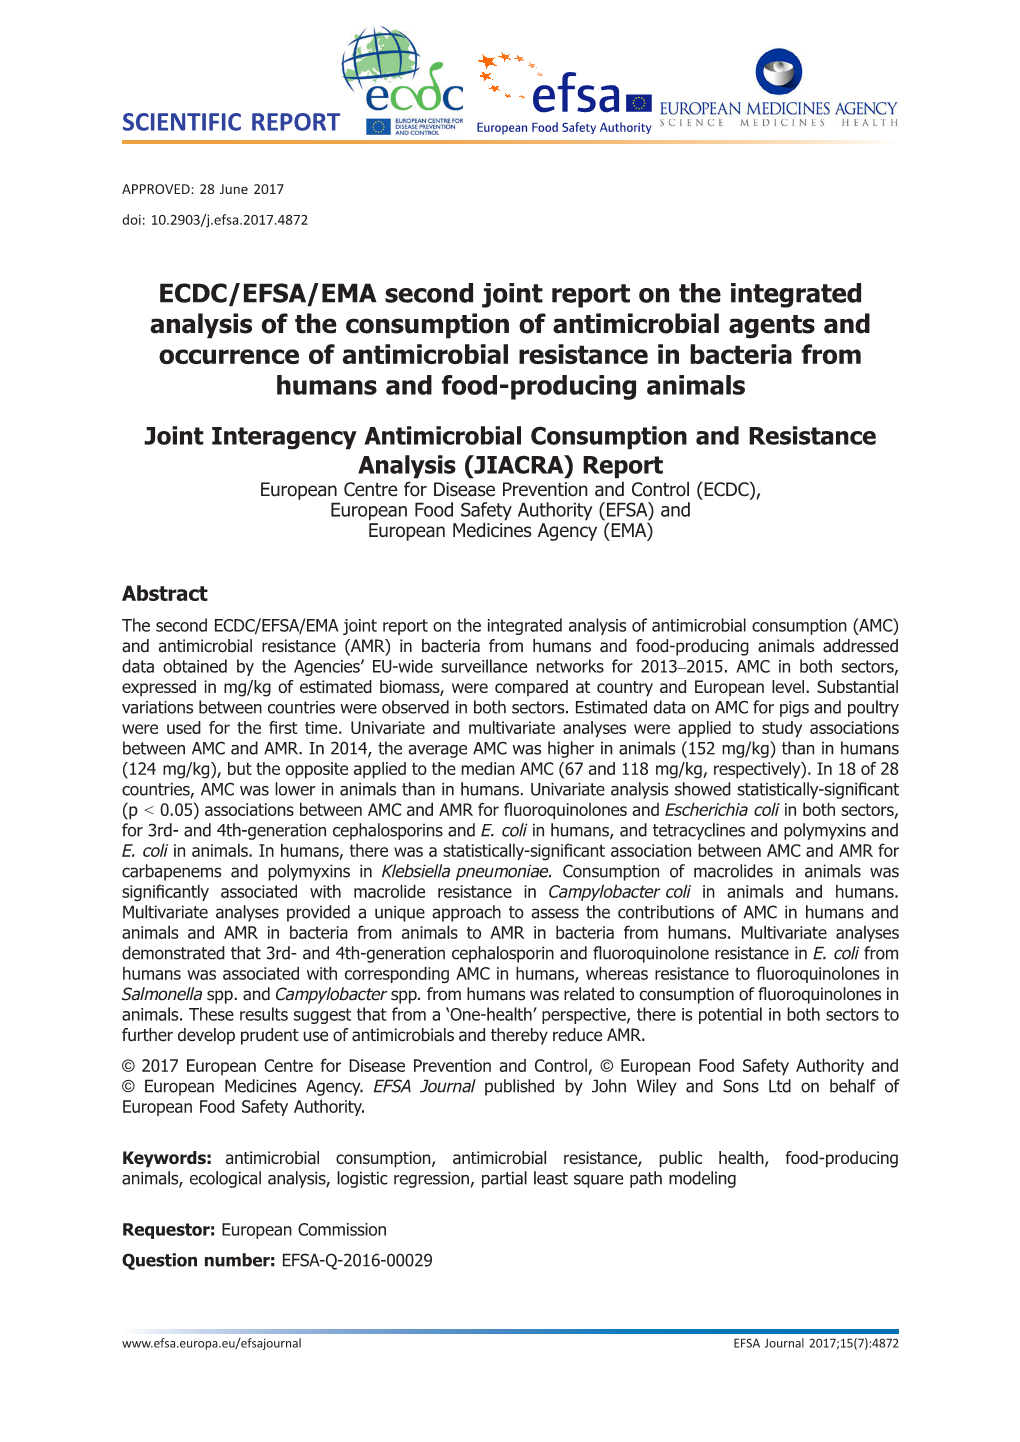 EMA Second Joint Report on the Integrated